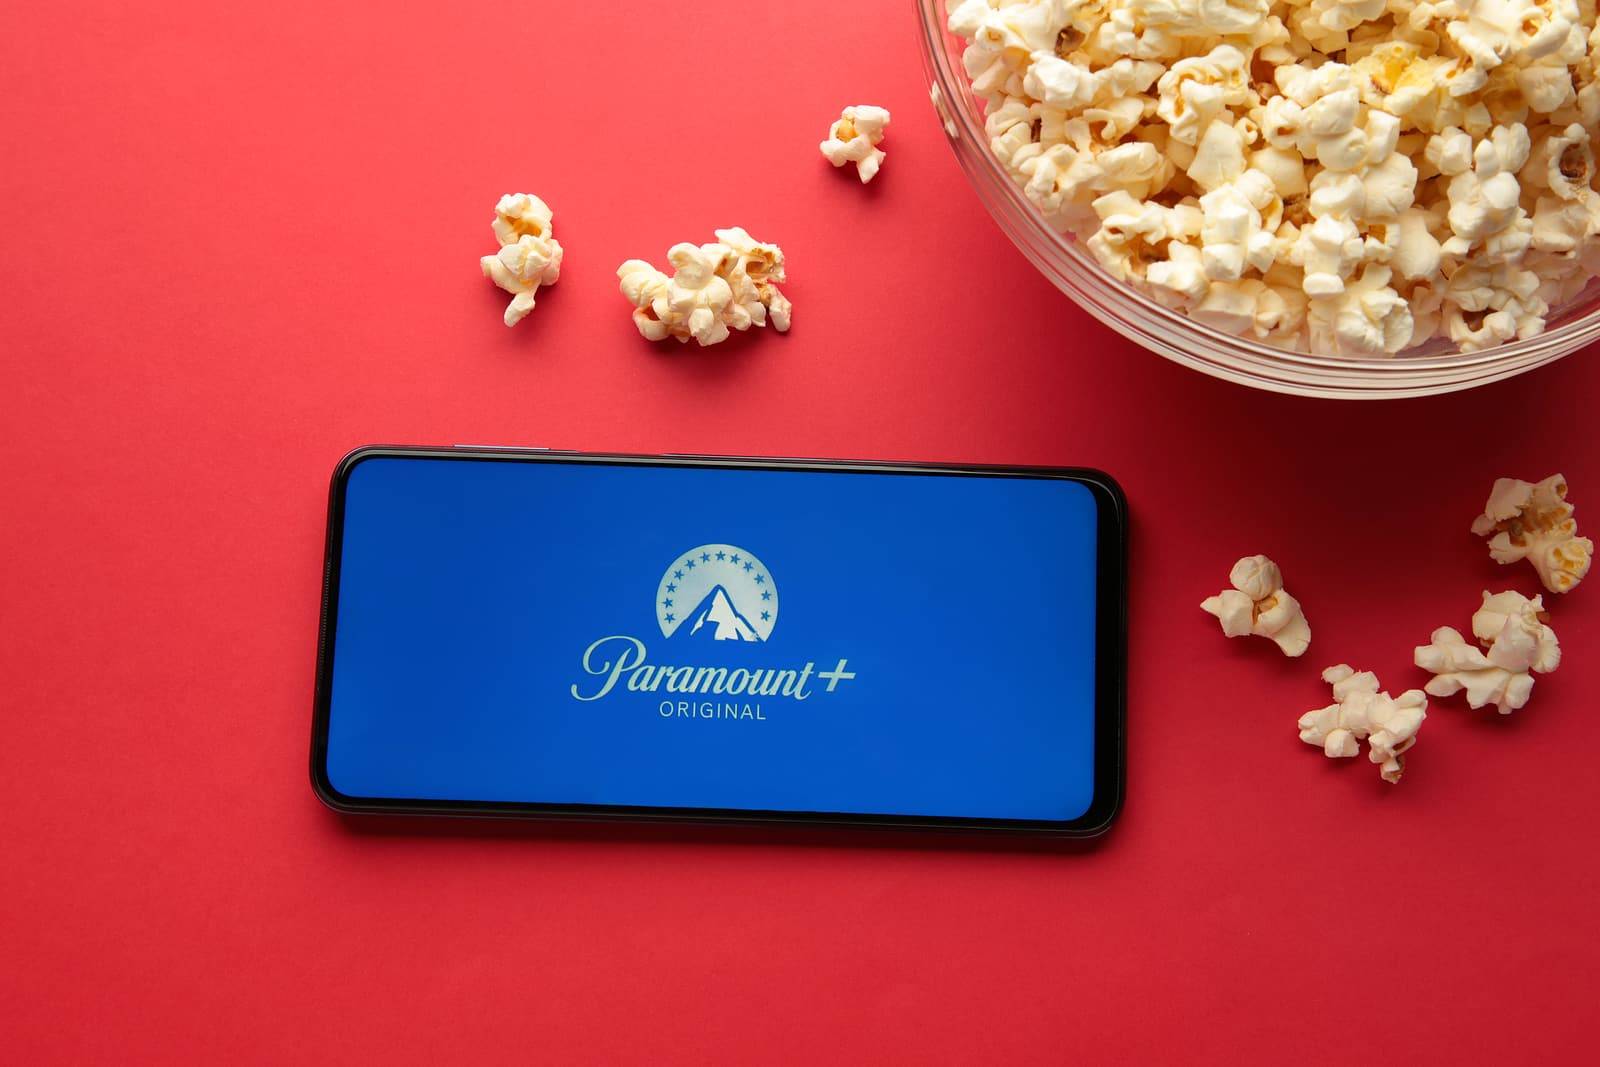 Paramount Network Scores Huge in Ratings with New Shows